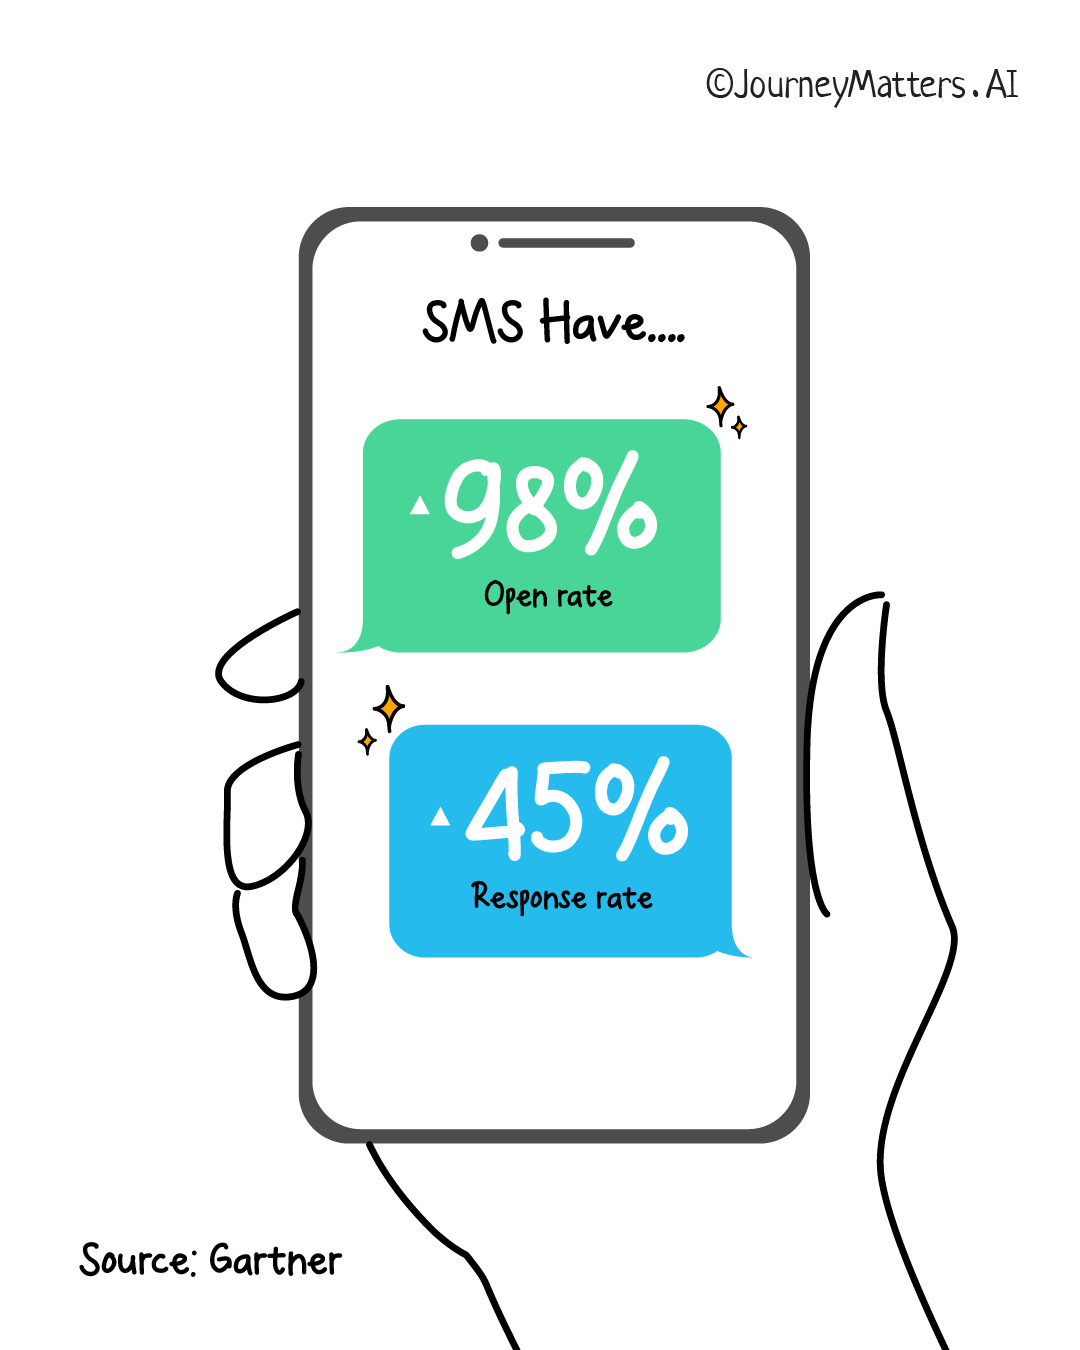  SMS messeages have 98% open rate and 45% response rate